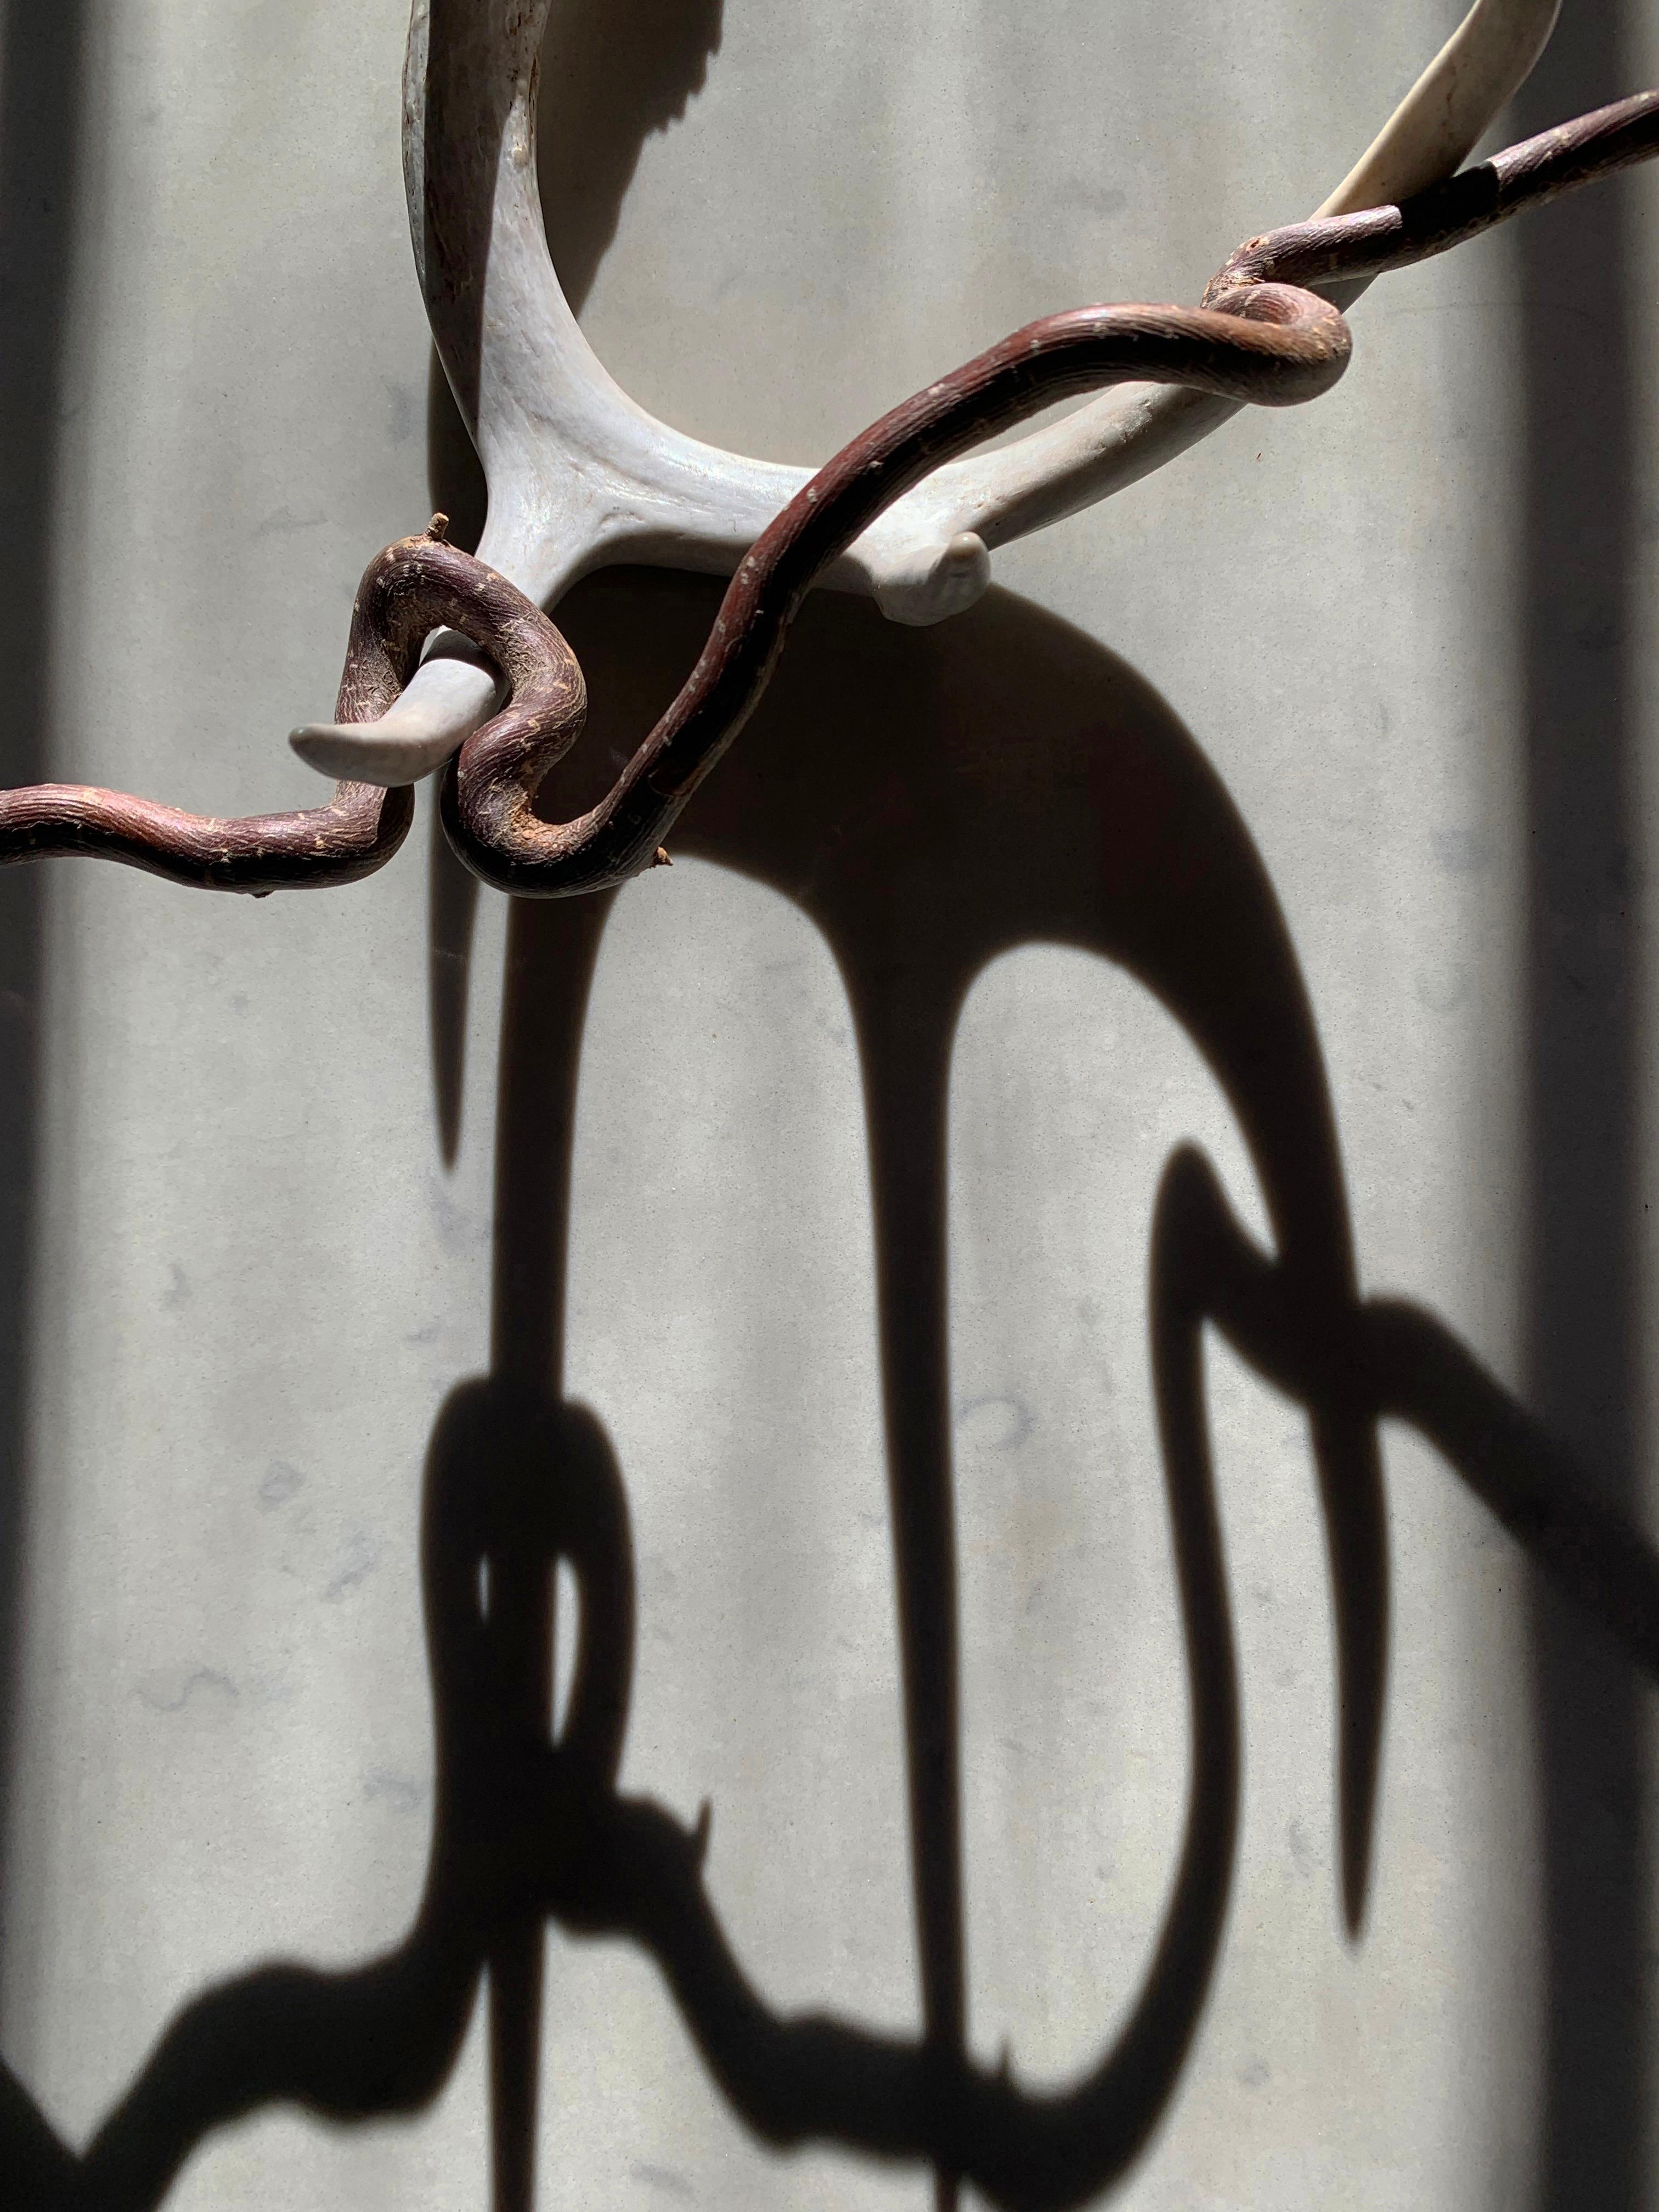 Untitled (2155): still life photograph w/ antler, bone & abstract shadow pattern - Photograph by Paul Cava